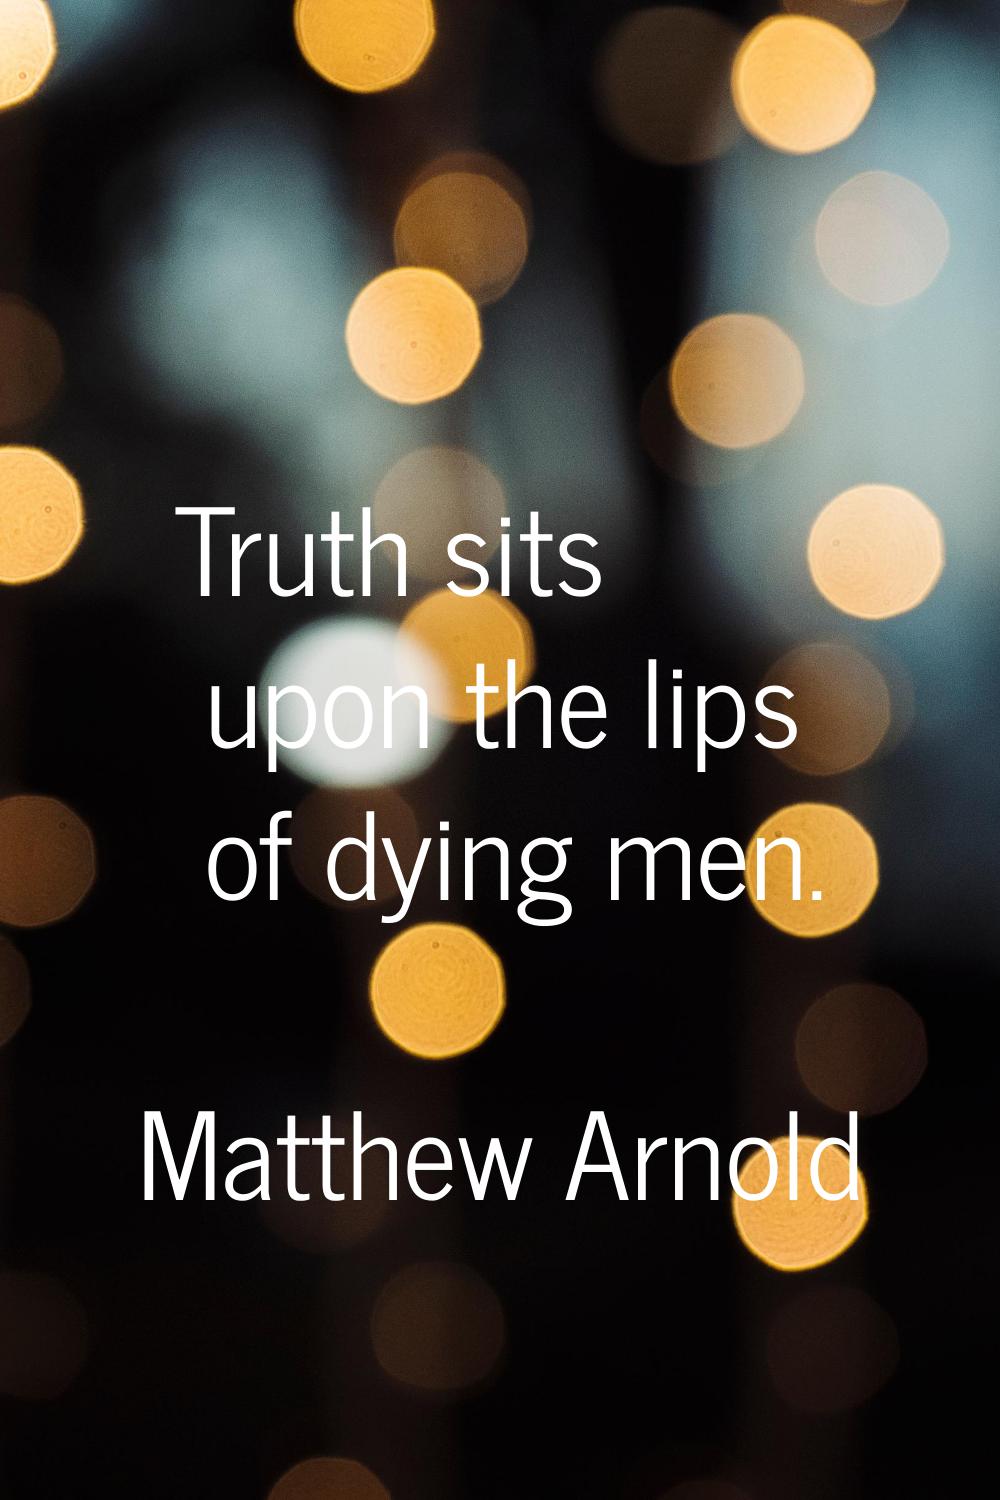 Truth sits upon the lips of dying men.